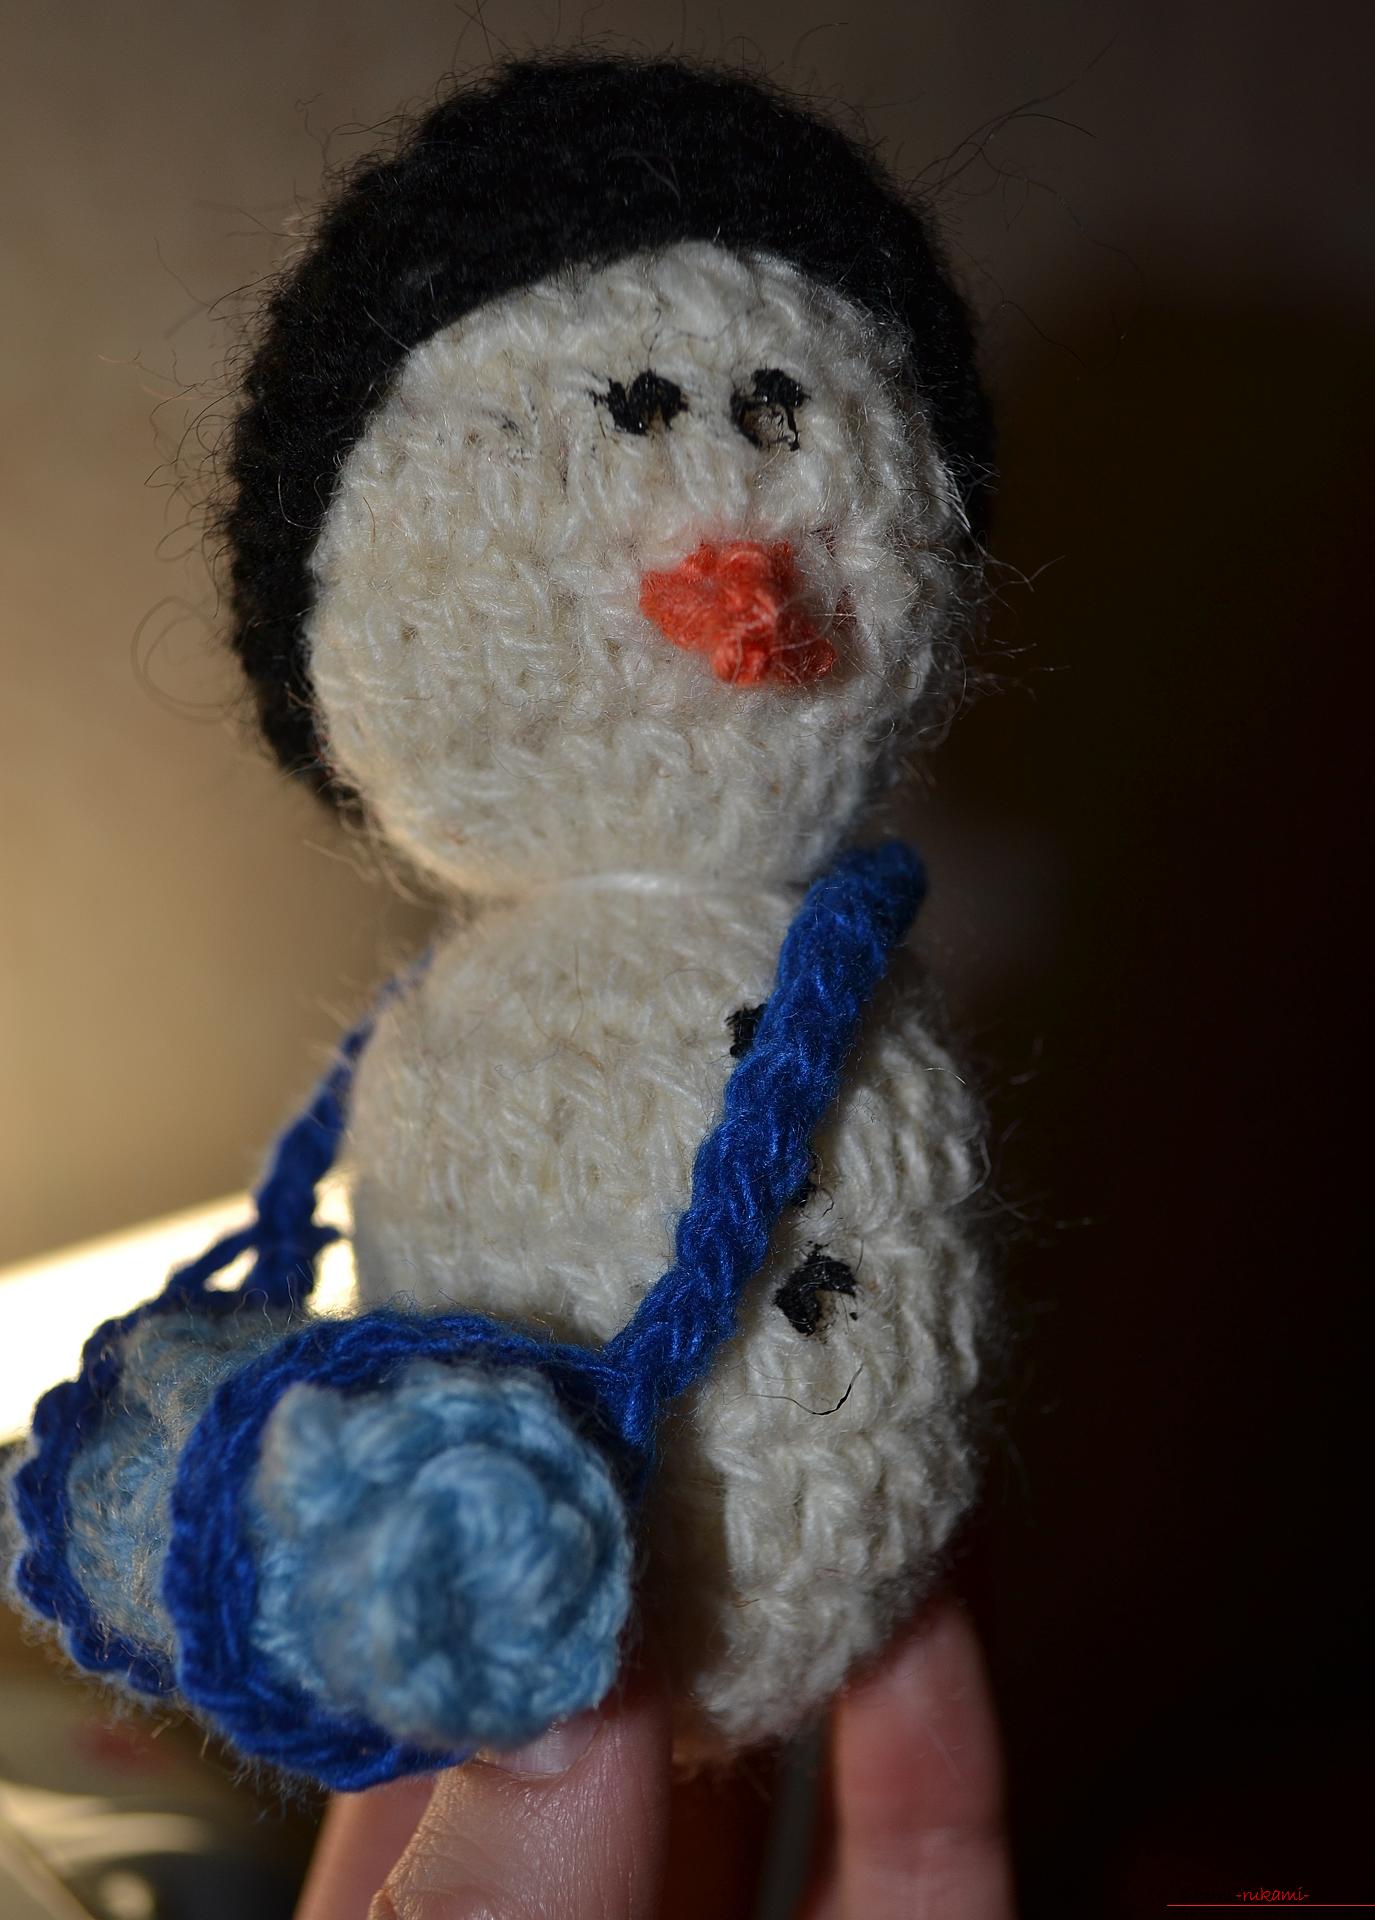 A master class with a photo and description will teach the crocheting of a snowman, which will be understandable for beginners. Photo №4